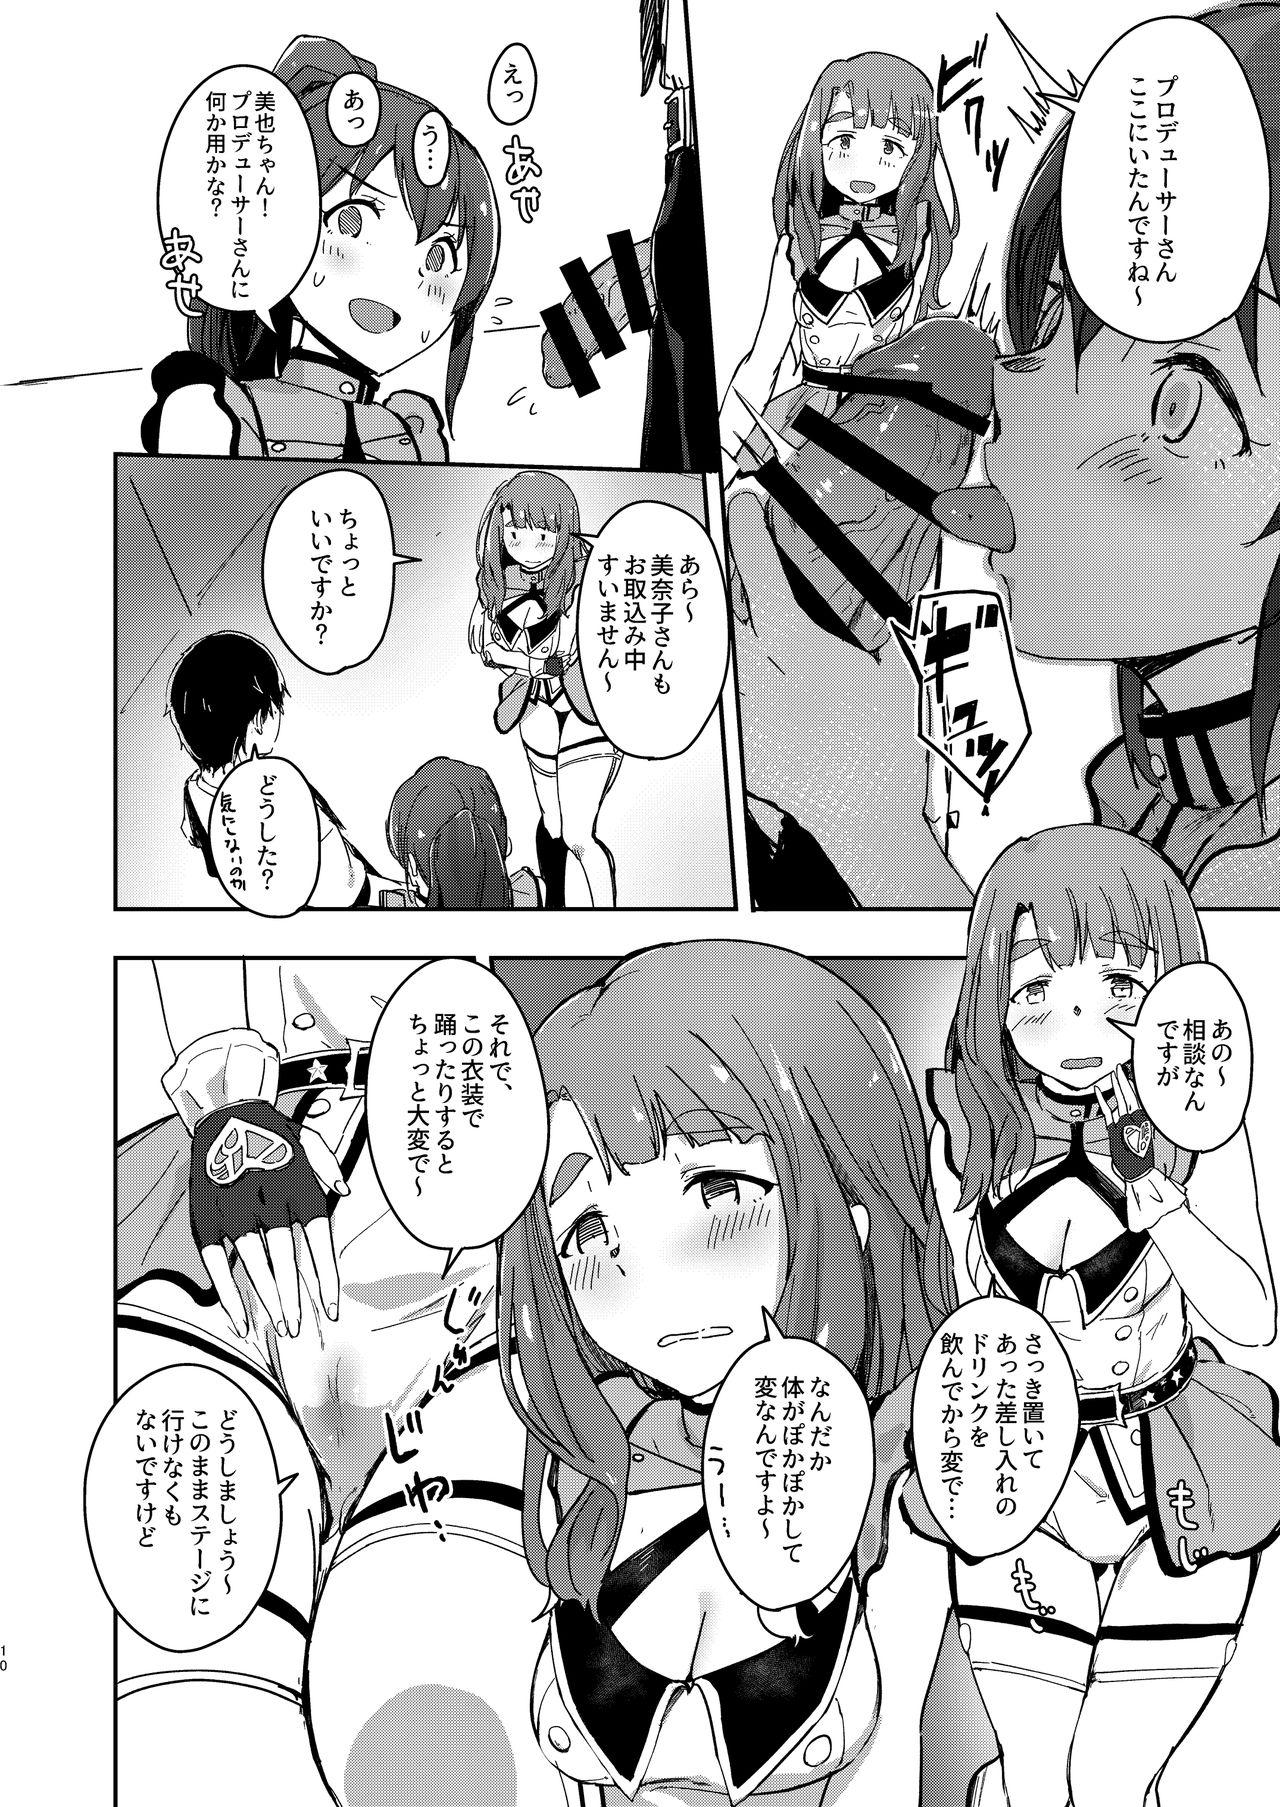 Old Vs Young TOP! CLOVER BOOK + omake - The idolmaster Gilf - Page 9